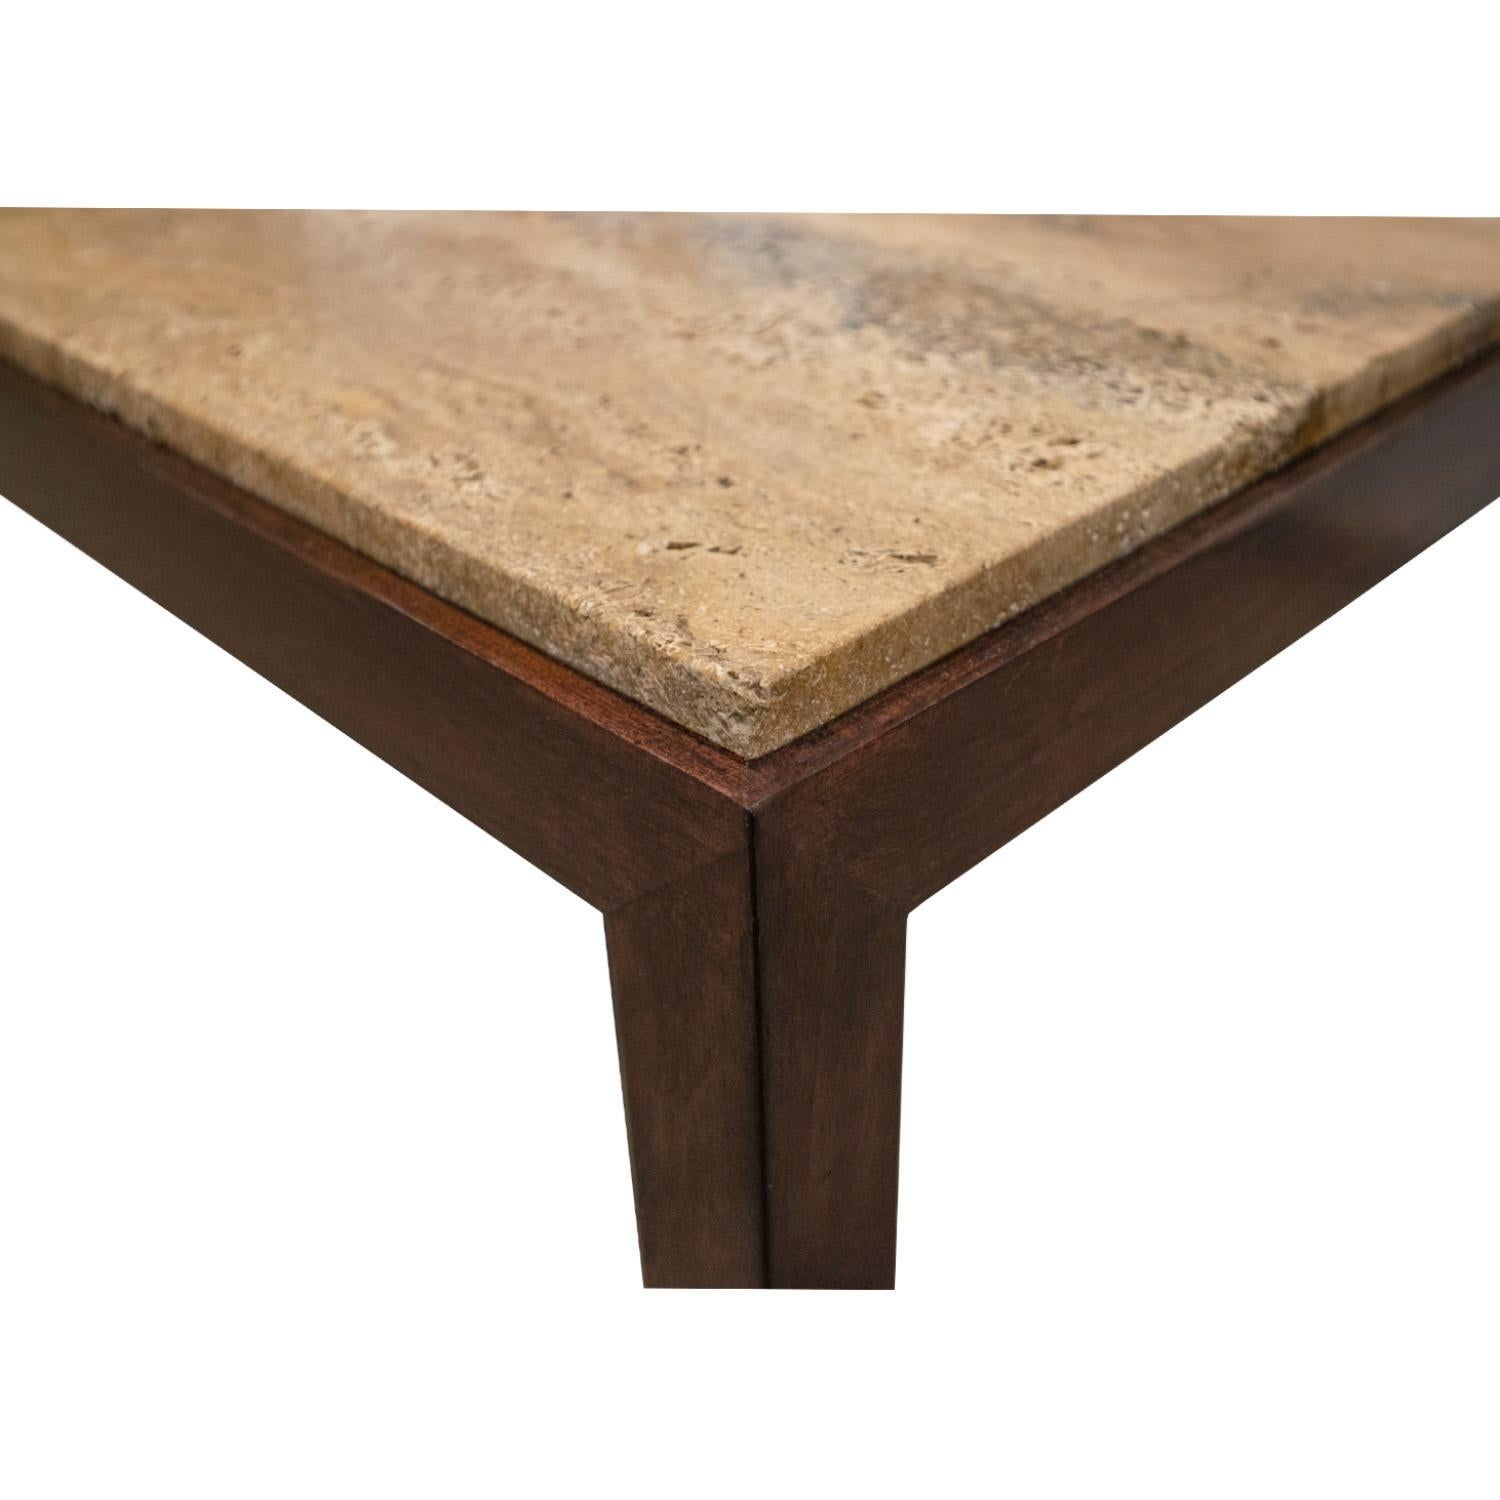 Edward Wormley Coffee Table with Italian Travertine Top 1952 'Signed' In Excellent Condition For Sale In New York, NY